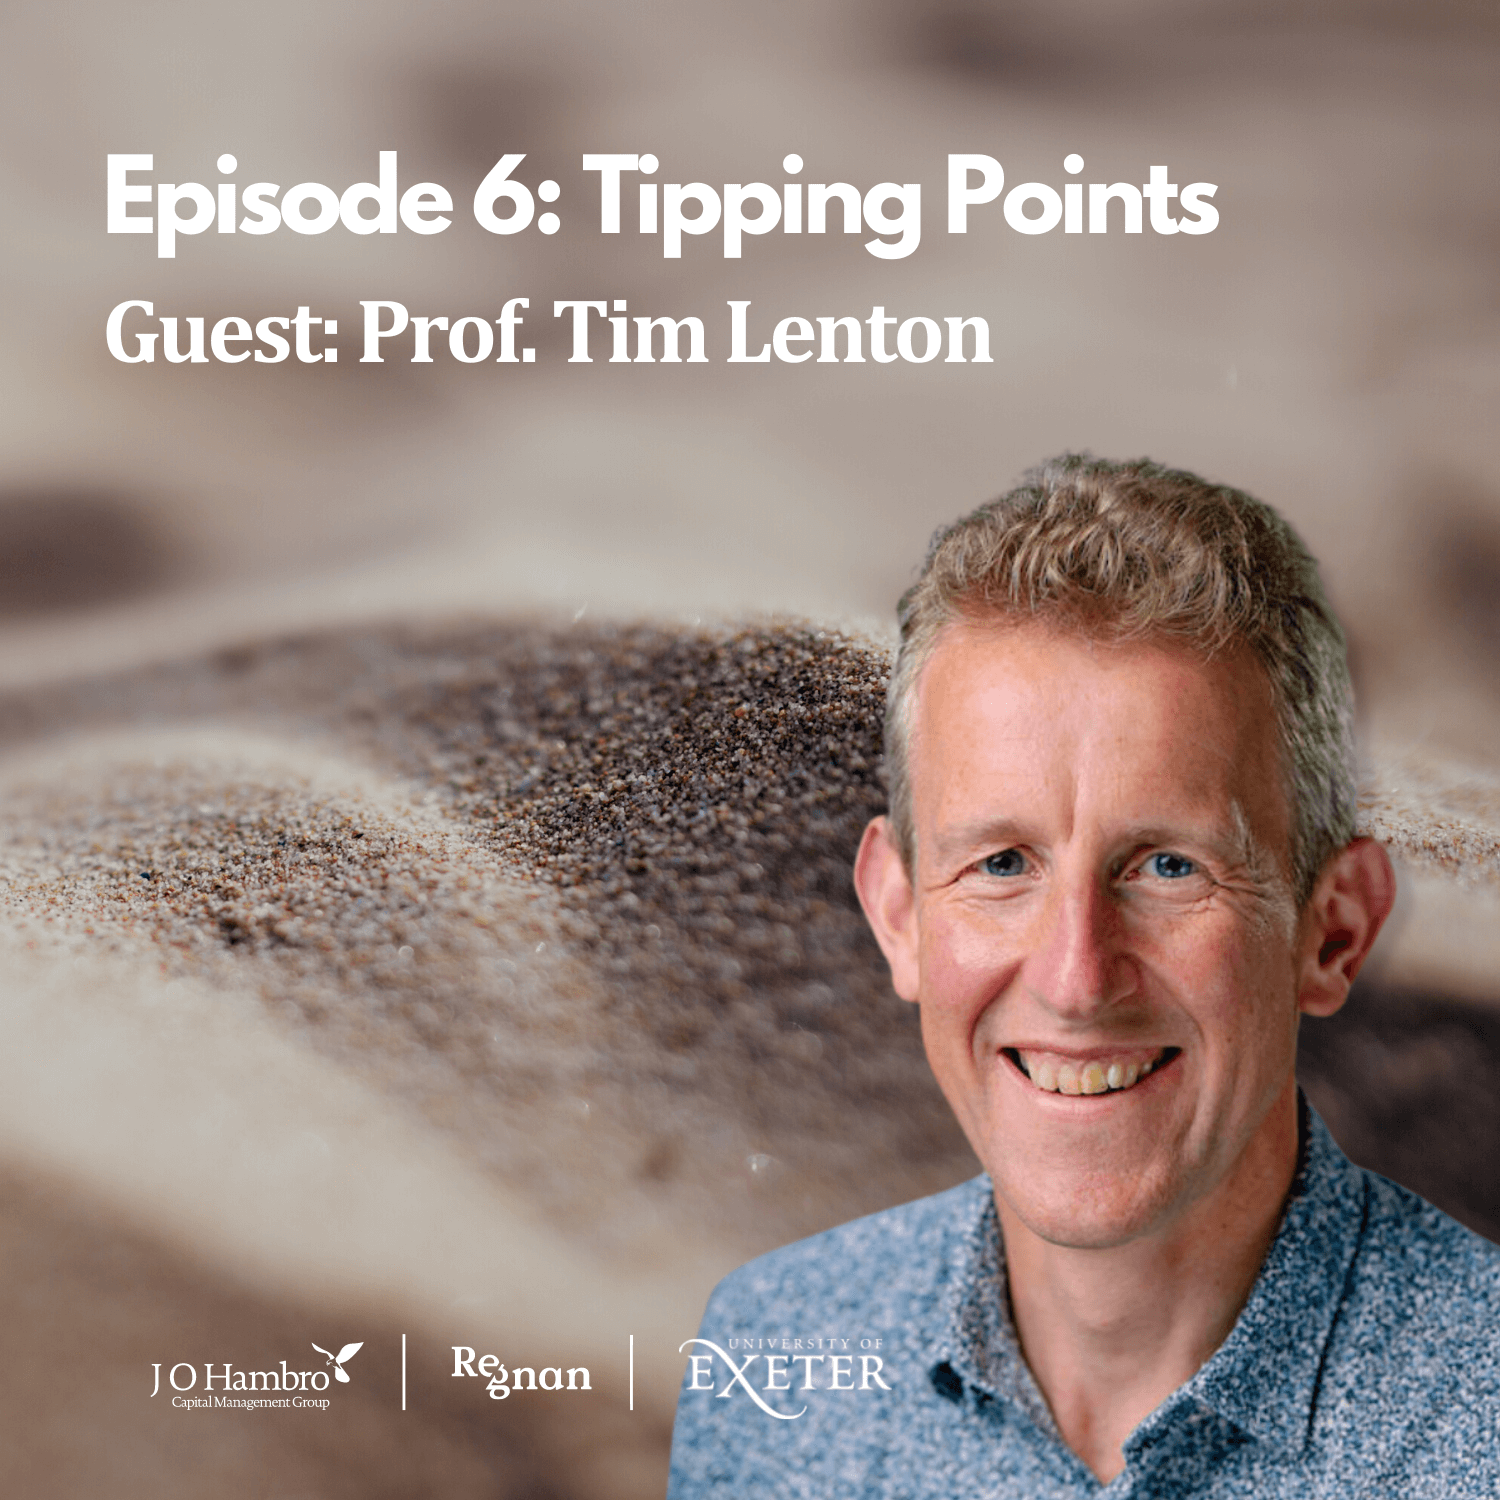 Episode 6: Tipping Points